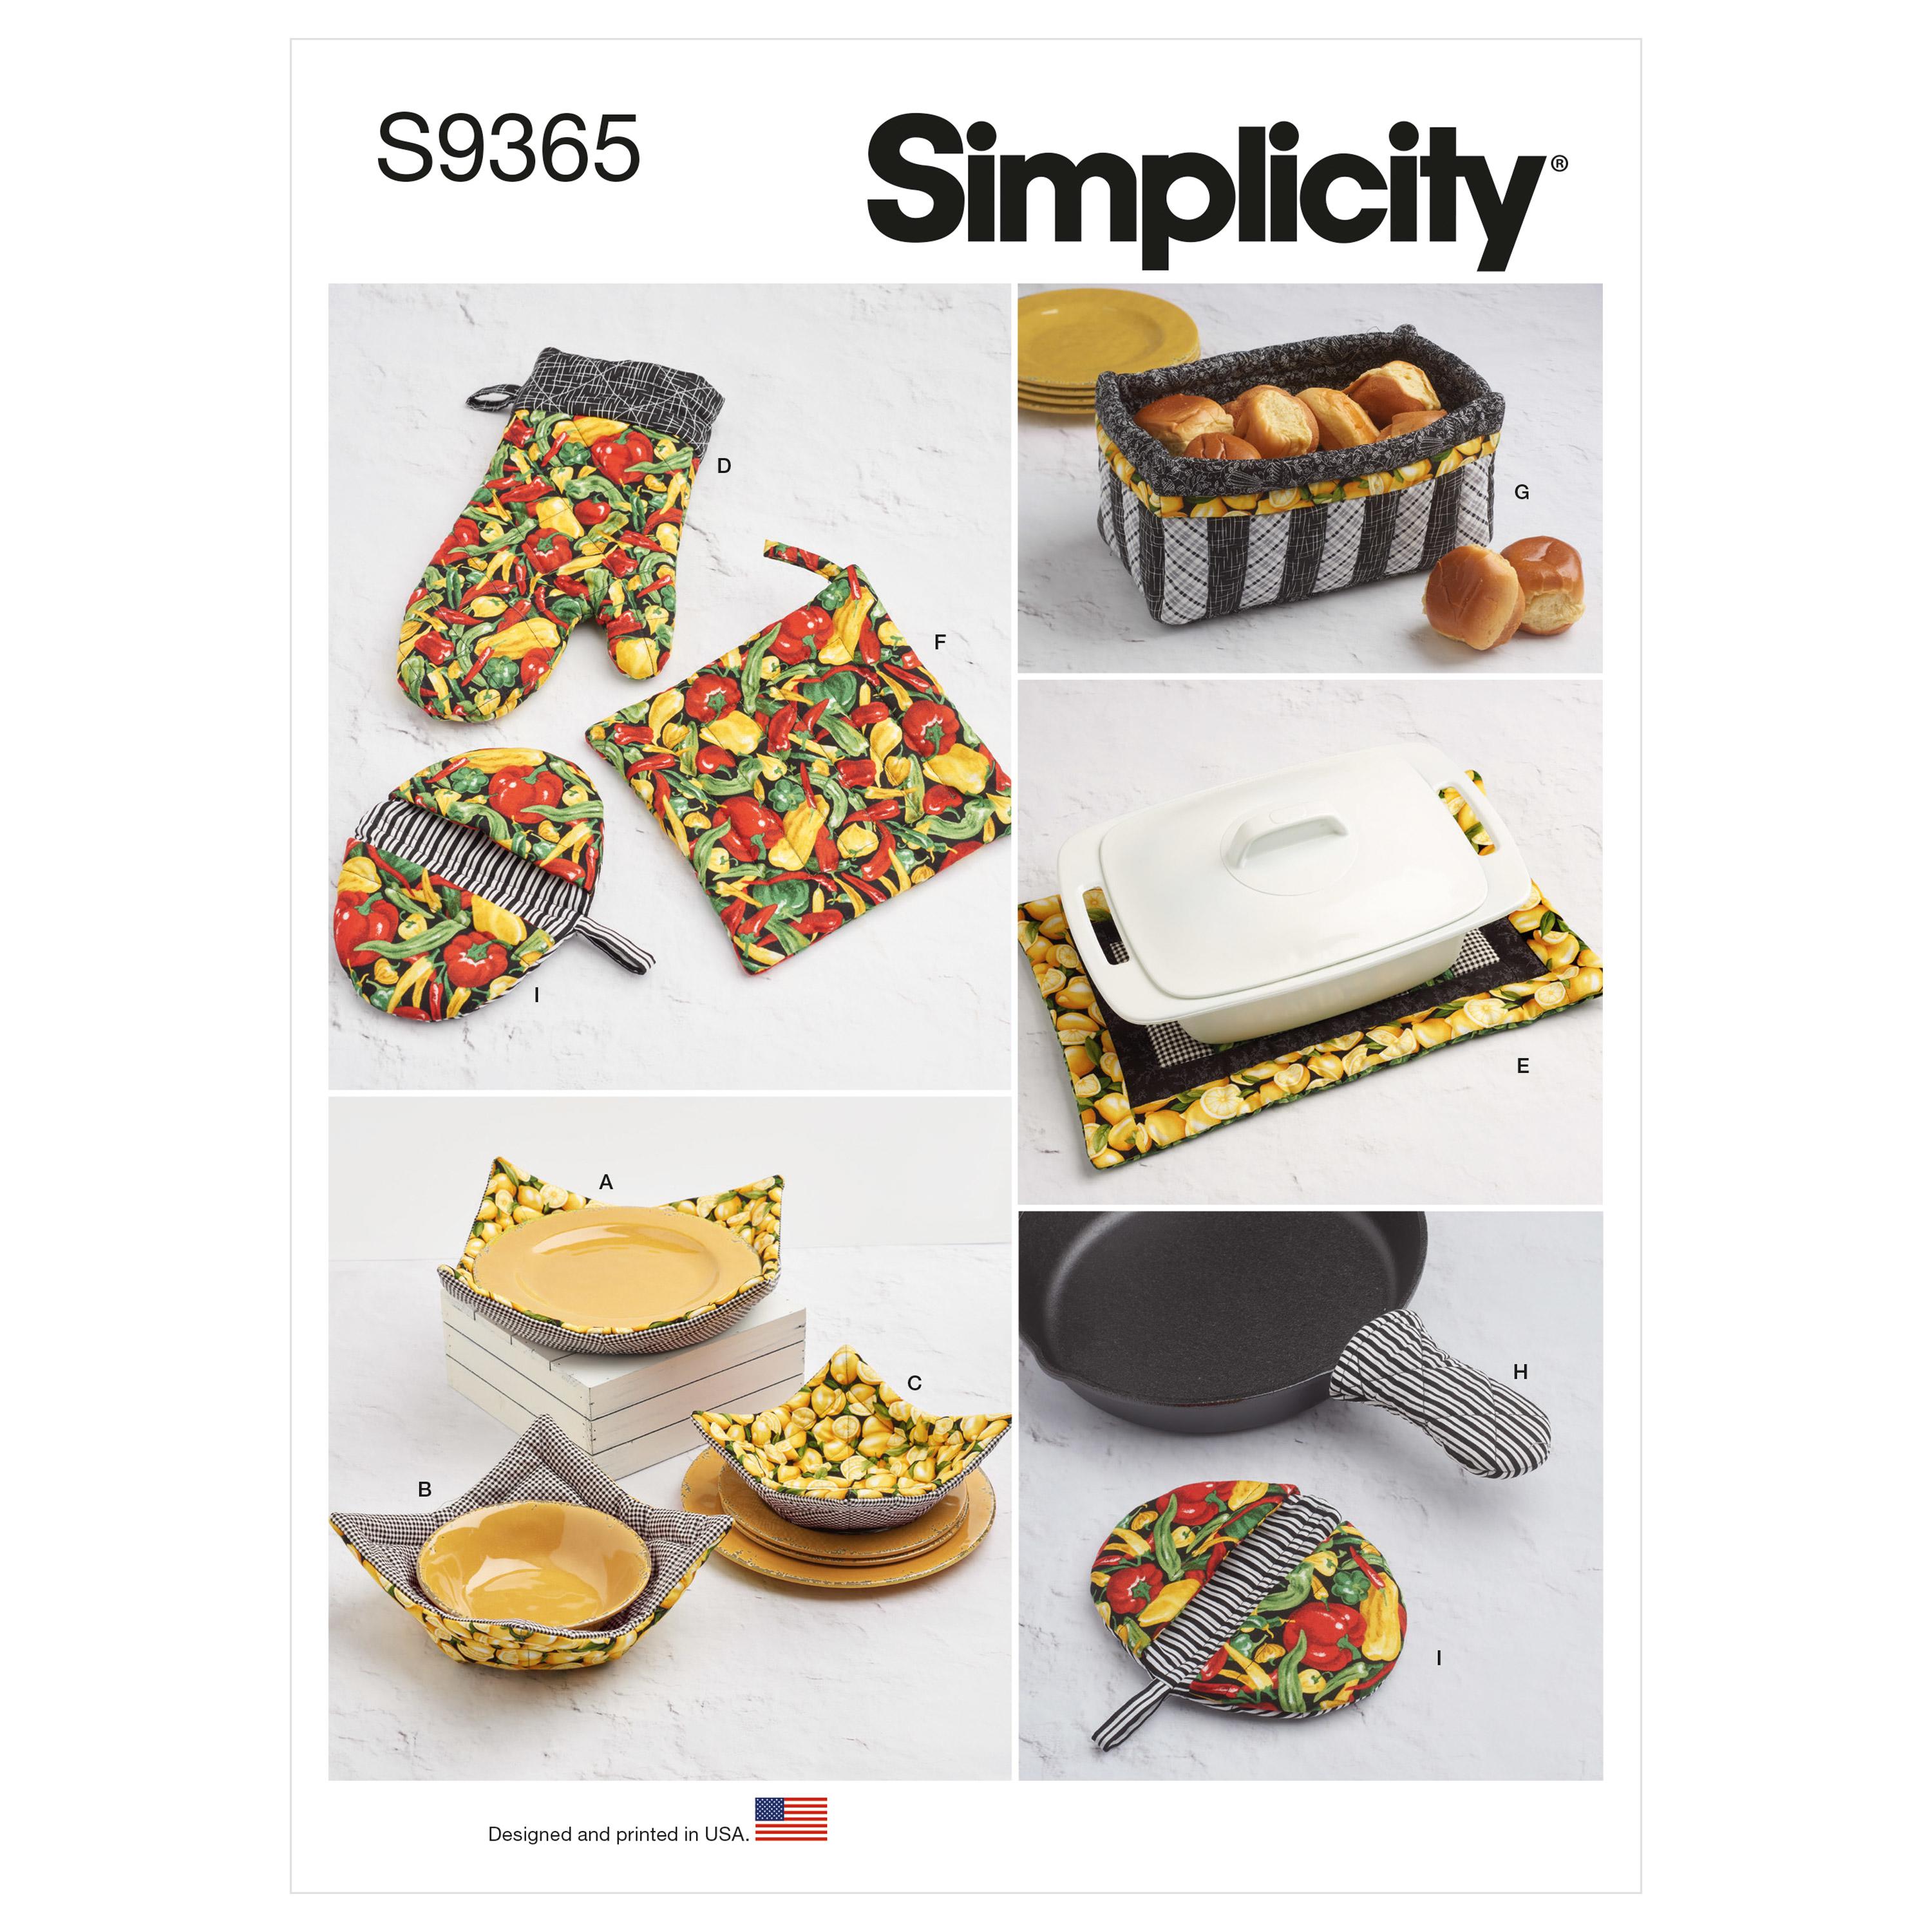 Simplicity Sewing Pattern S9365 Quilted Kitchen Accessories